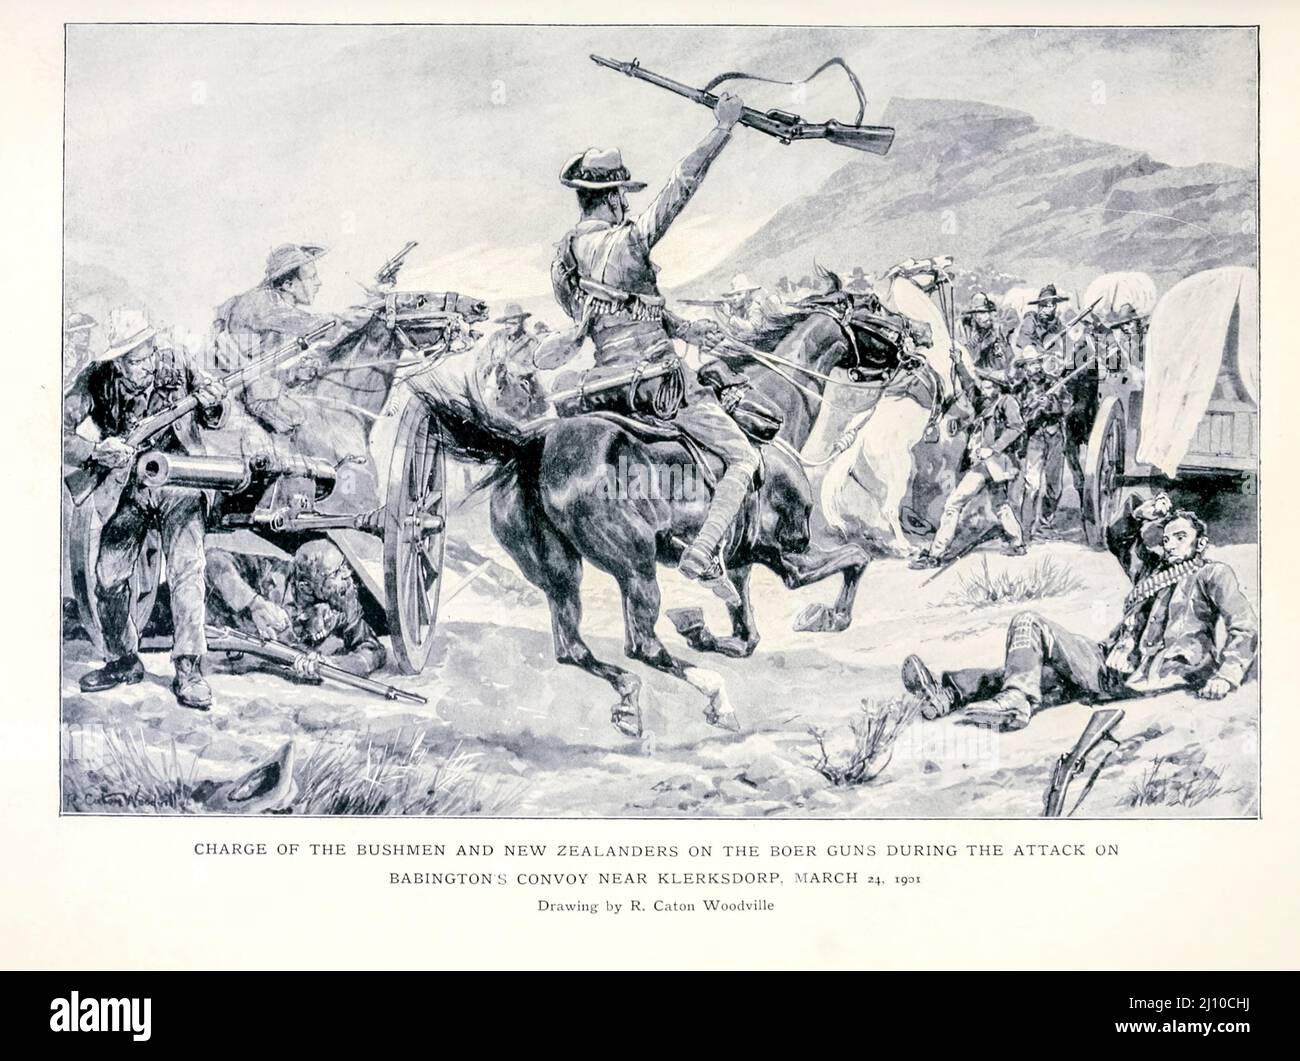 Charge of the Bushmen and New Zealanders on the Boer guns during the Attack on Babington's Convoy near Klersdorp March 24, 1901 Drawing by R. Caton Woodville from the book ' South Africa and the Transvaal war ' by Louis Creswicke, Publisher; Edinburgh : T. C. & E. C. Jack 1900 Stock Photo